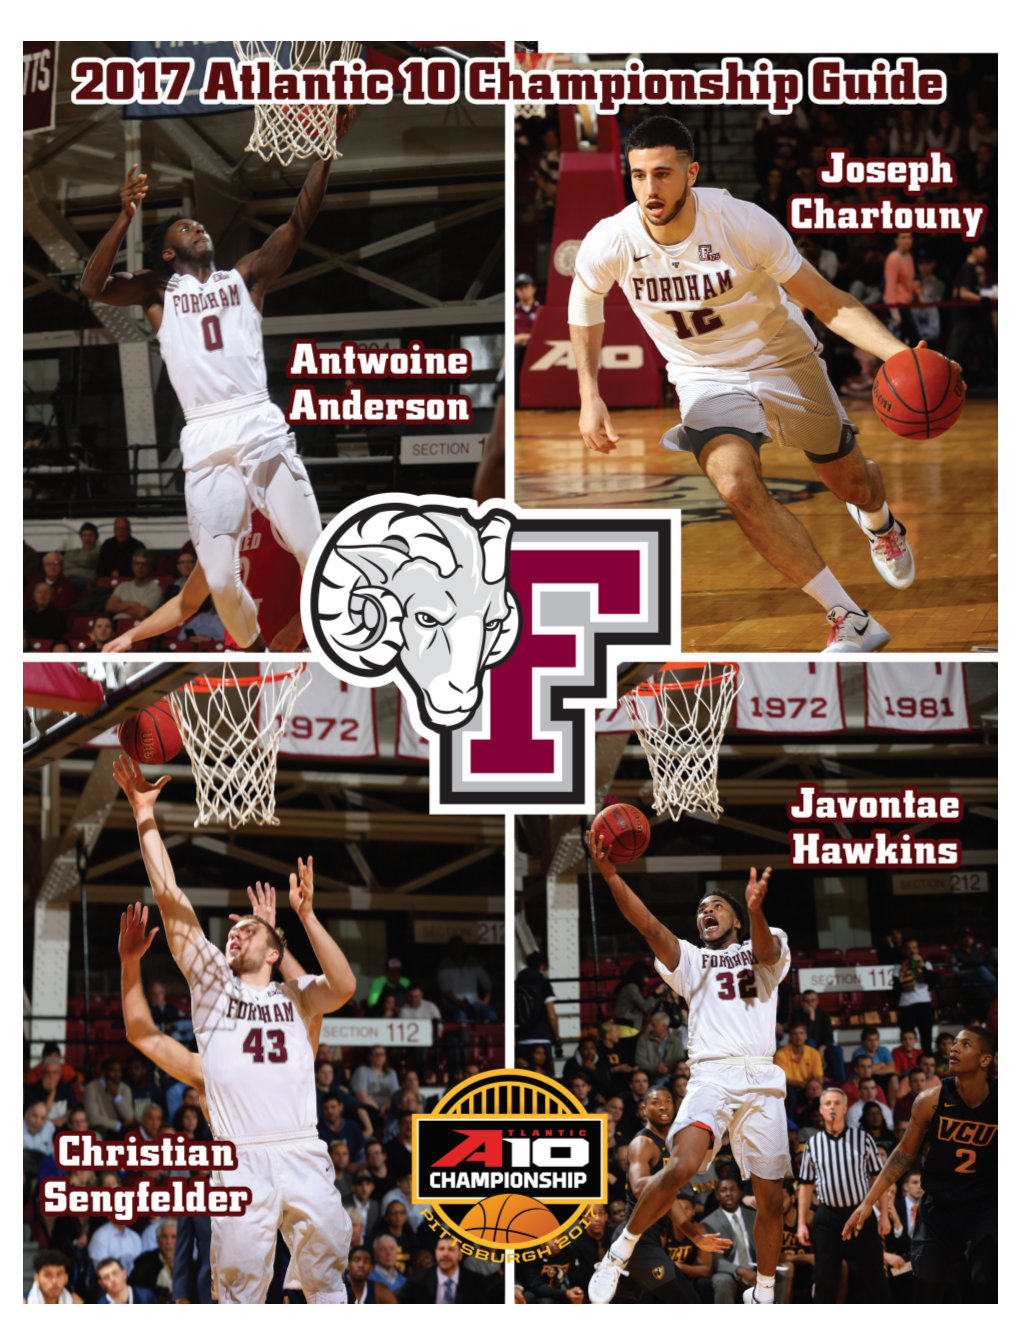 Fordham University Basketball Game Notes - 1 2017 Atlantic 10 Basketball Championship March 8-12, 2017 - PPG PAINTS Arena - Pittsburgh, Pa